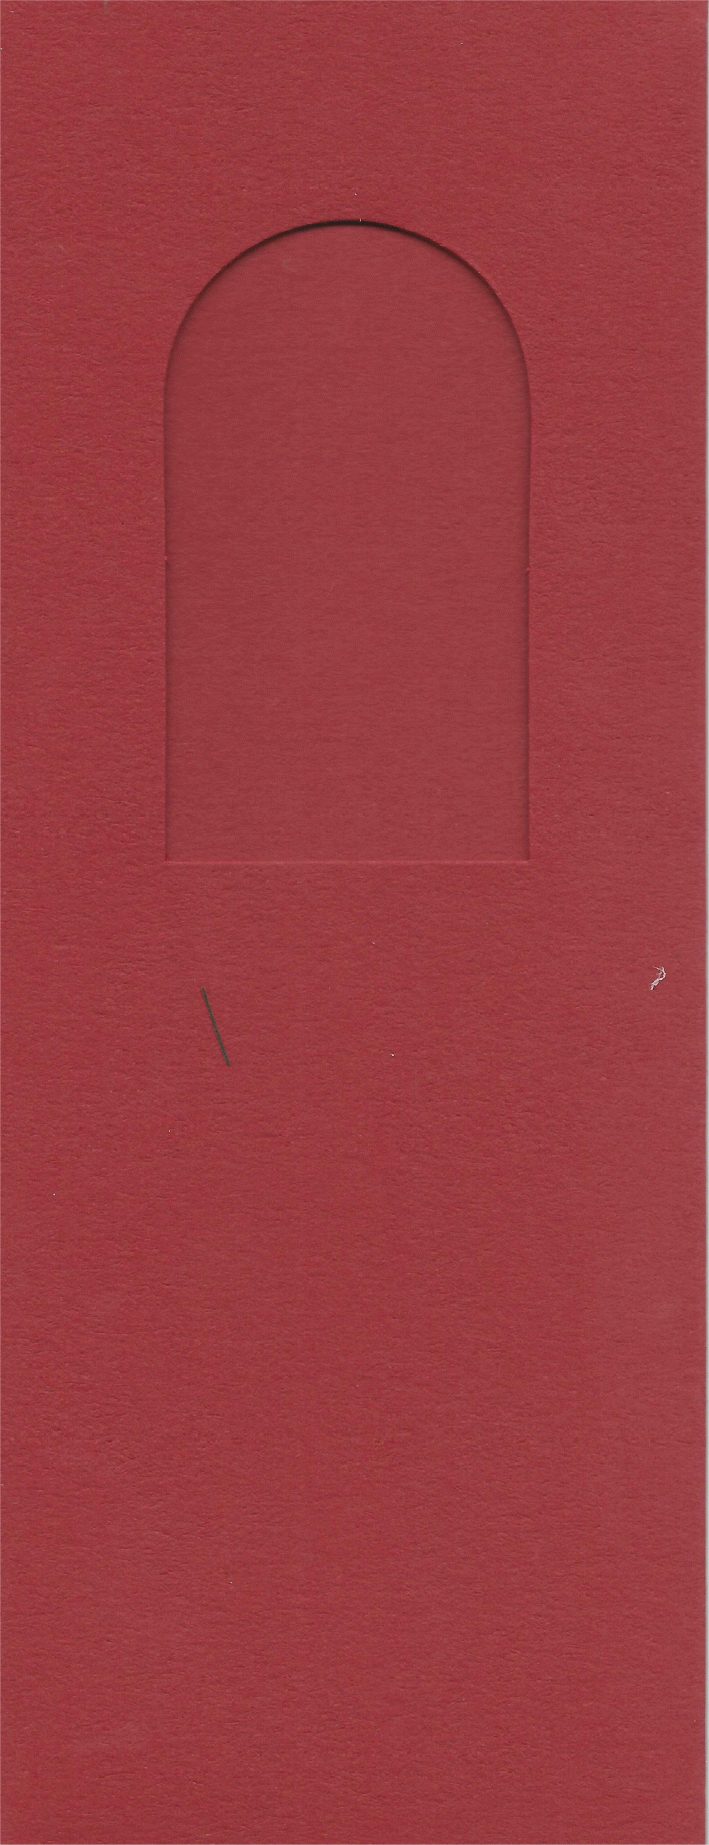 PK282-18 Red Double Fold with Small Arched Aperture.  Pack of 5 Cards    